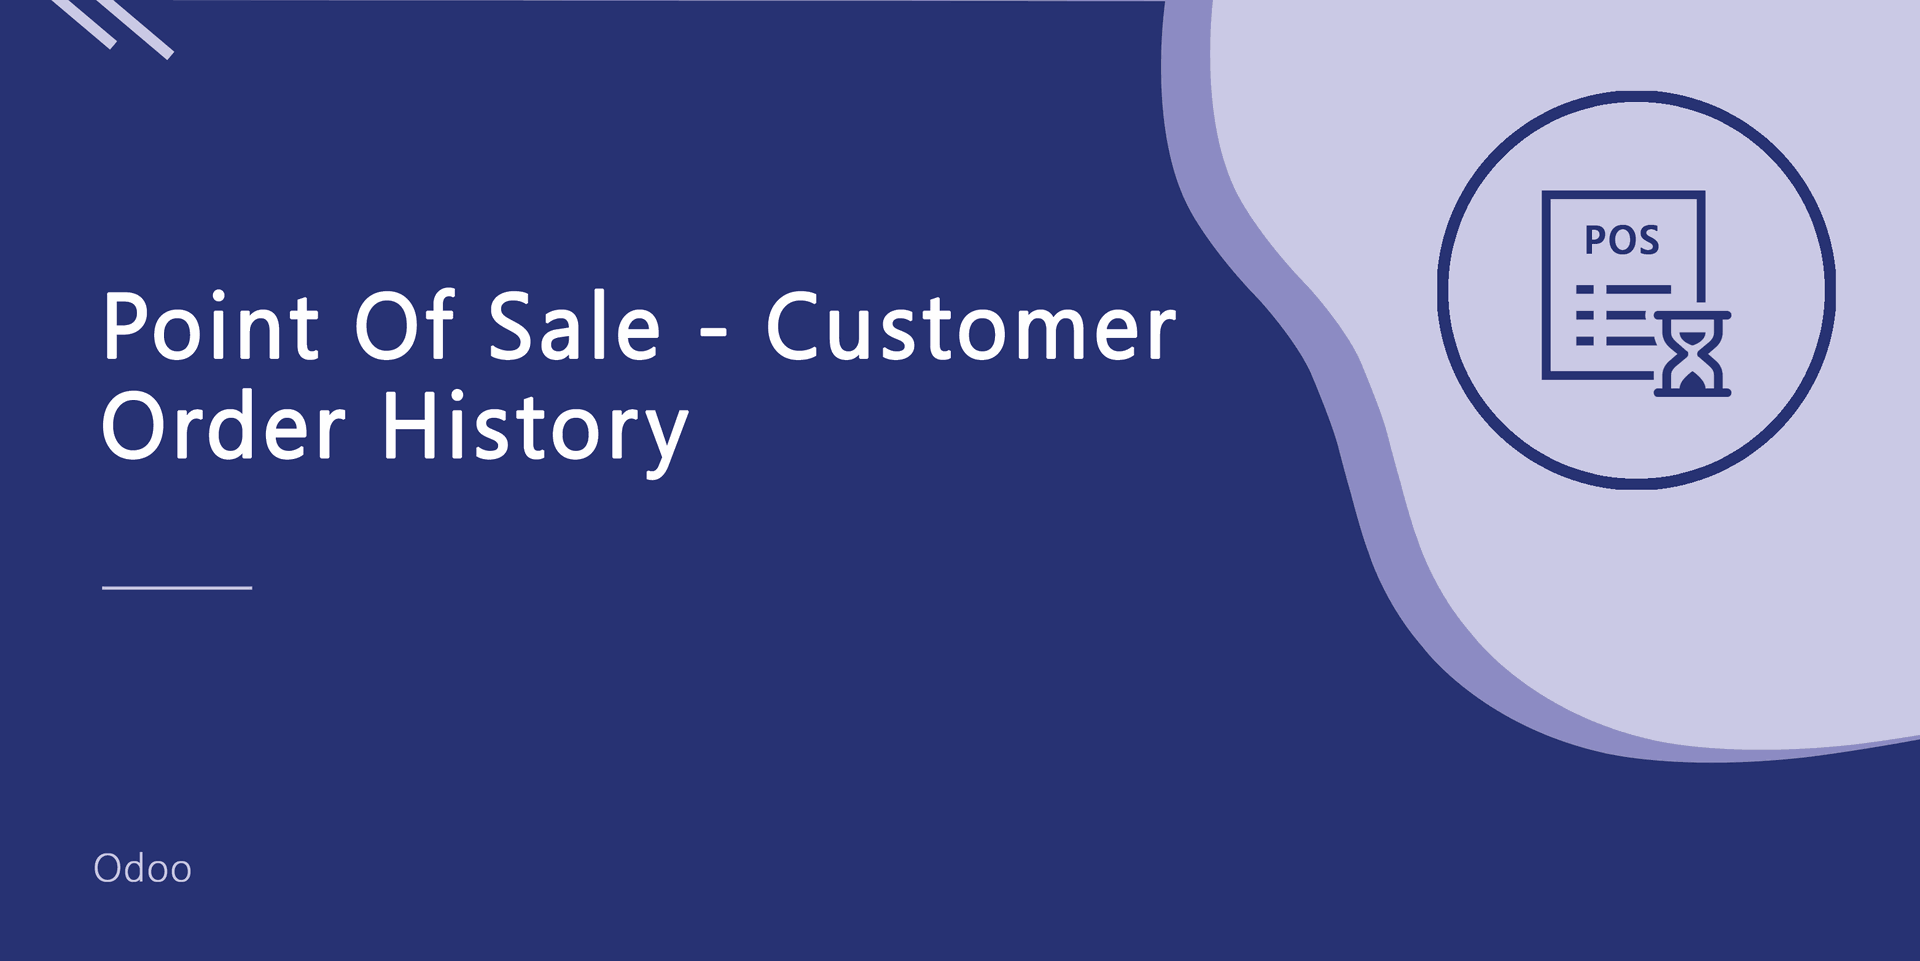 Point Of Sale - Customer Order History